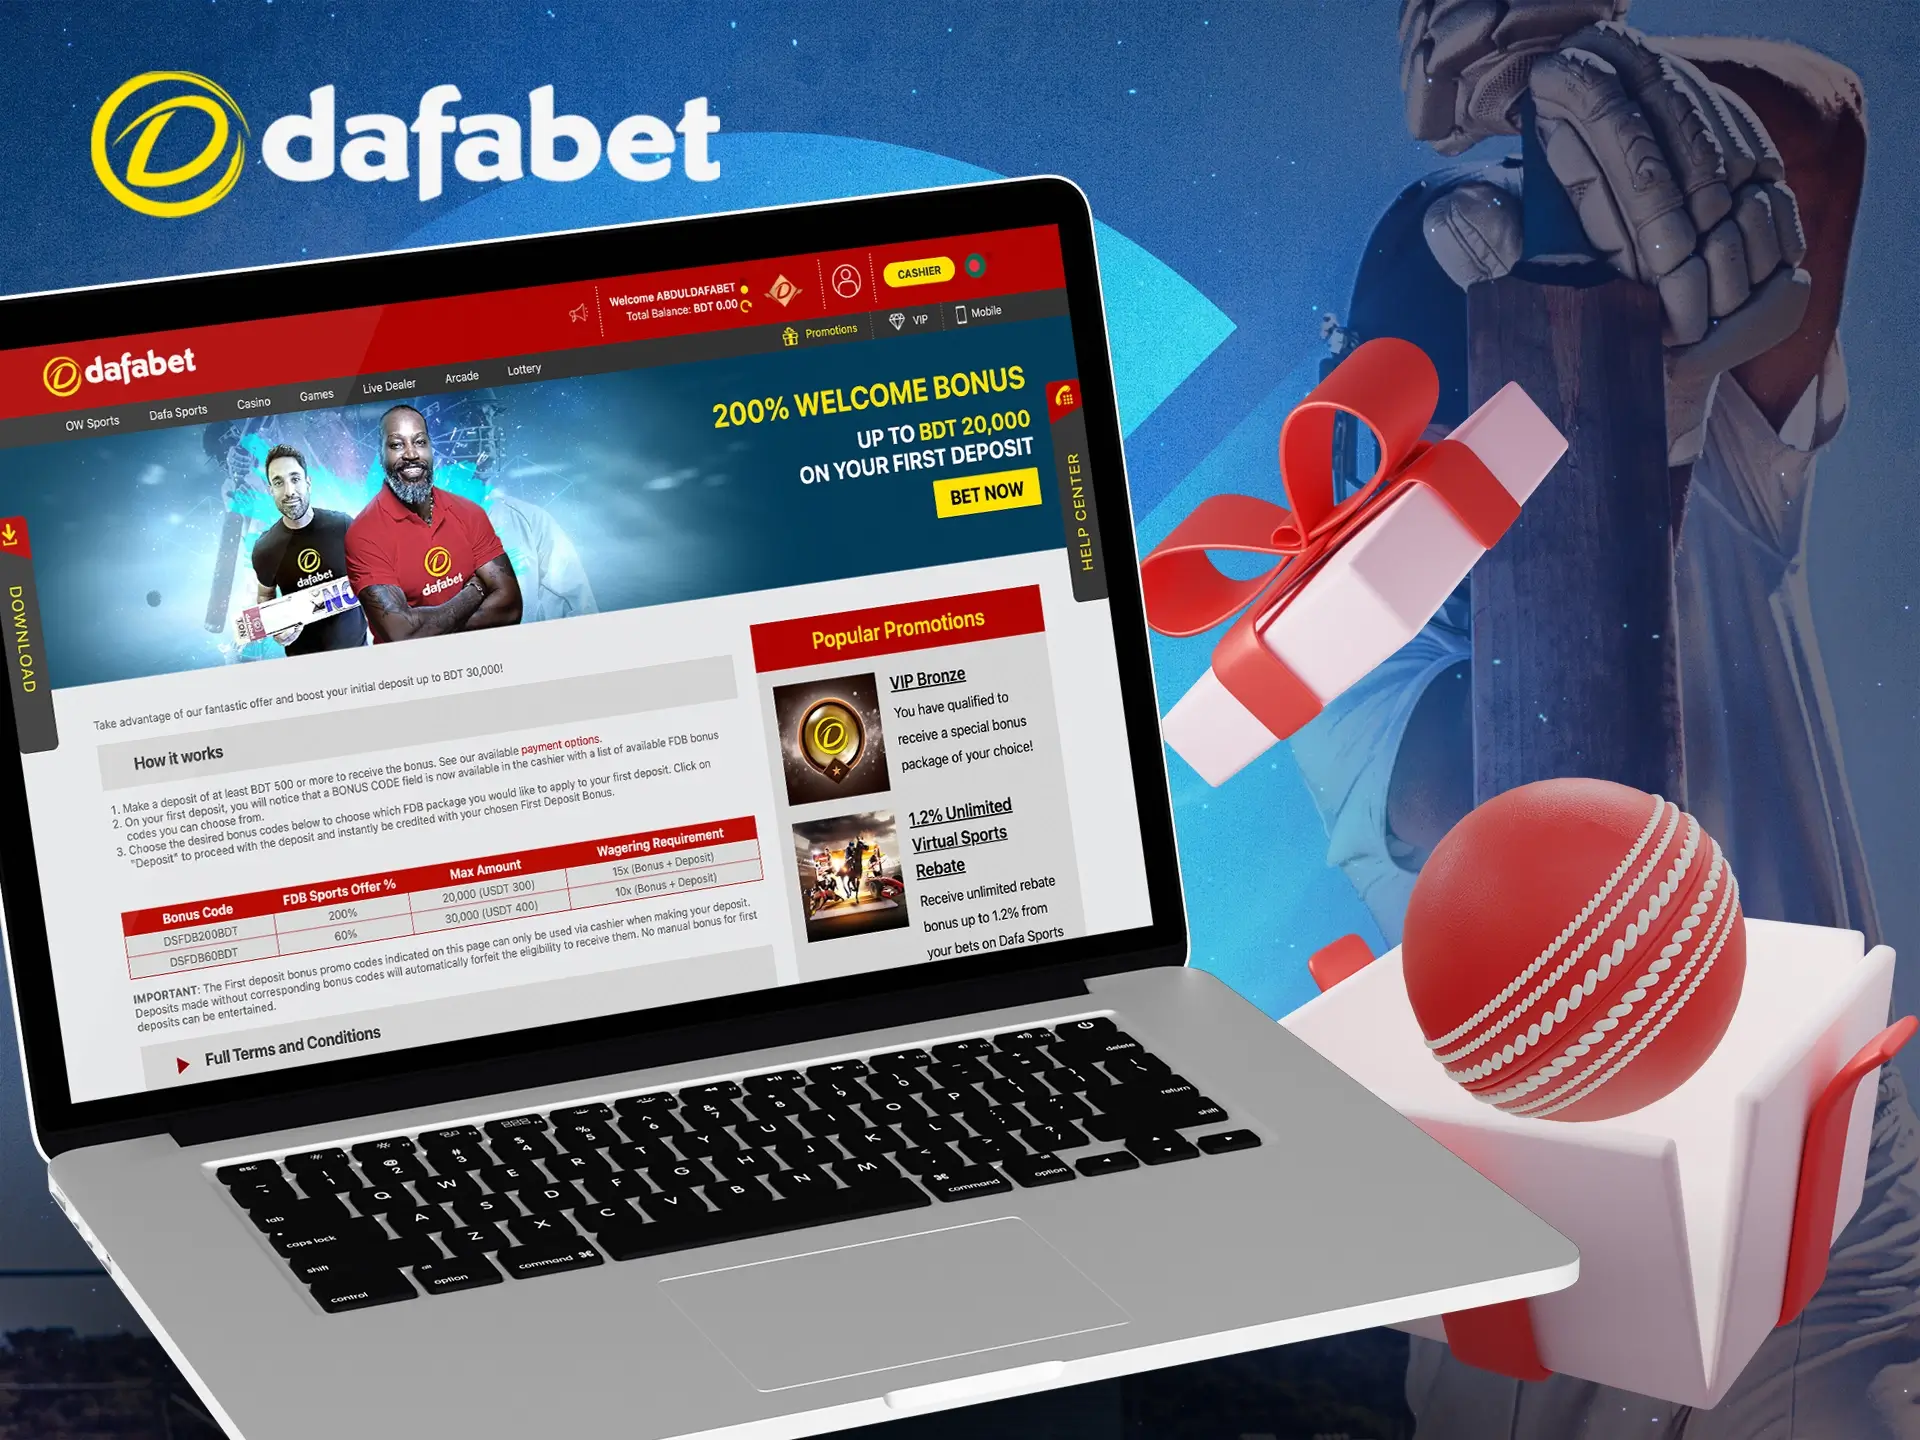 Dafabet has a great offer for sports fans that will give a good boost to your wins.